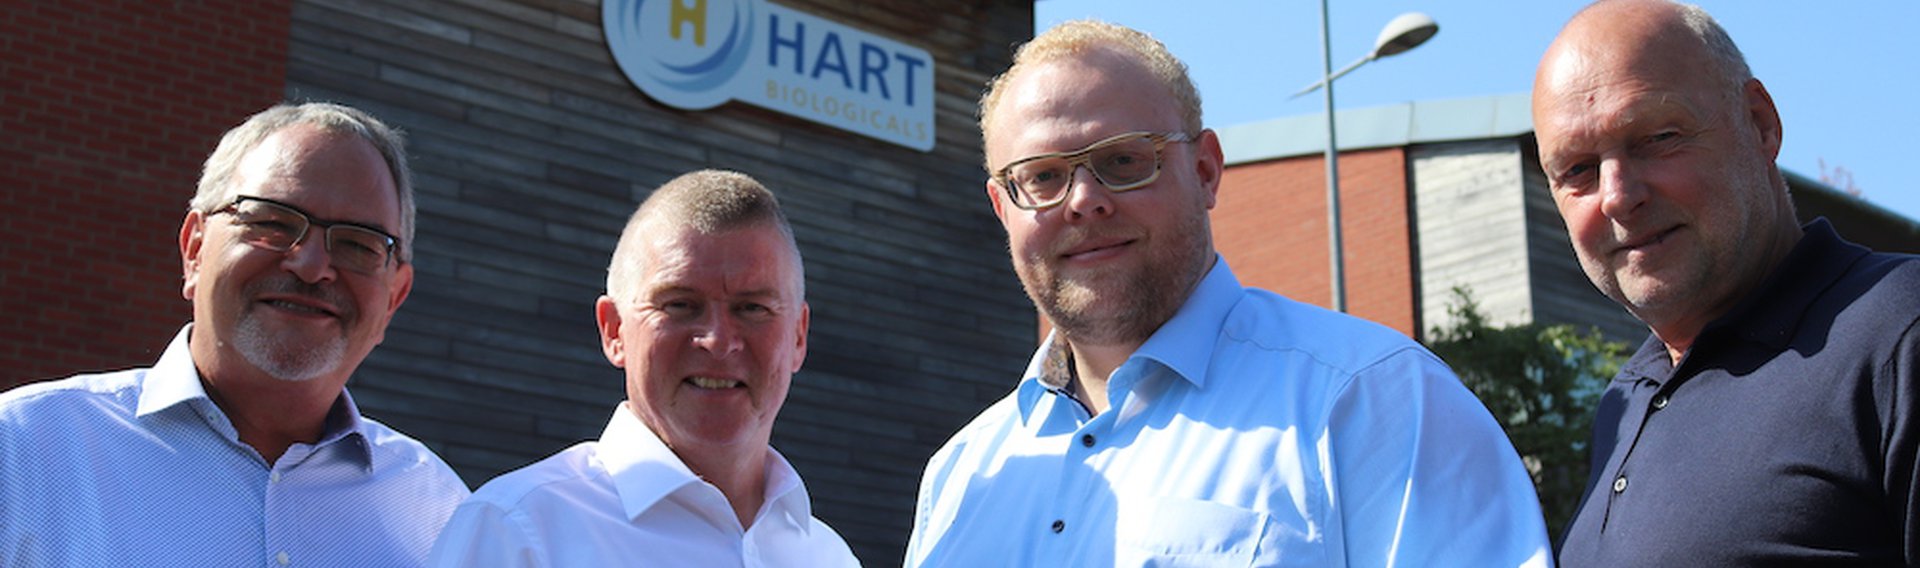 Hart Biologicals acquisition will see substantial double-digit growth Image